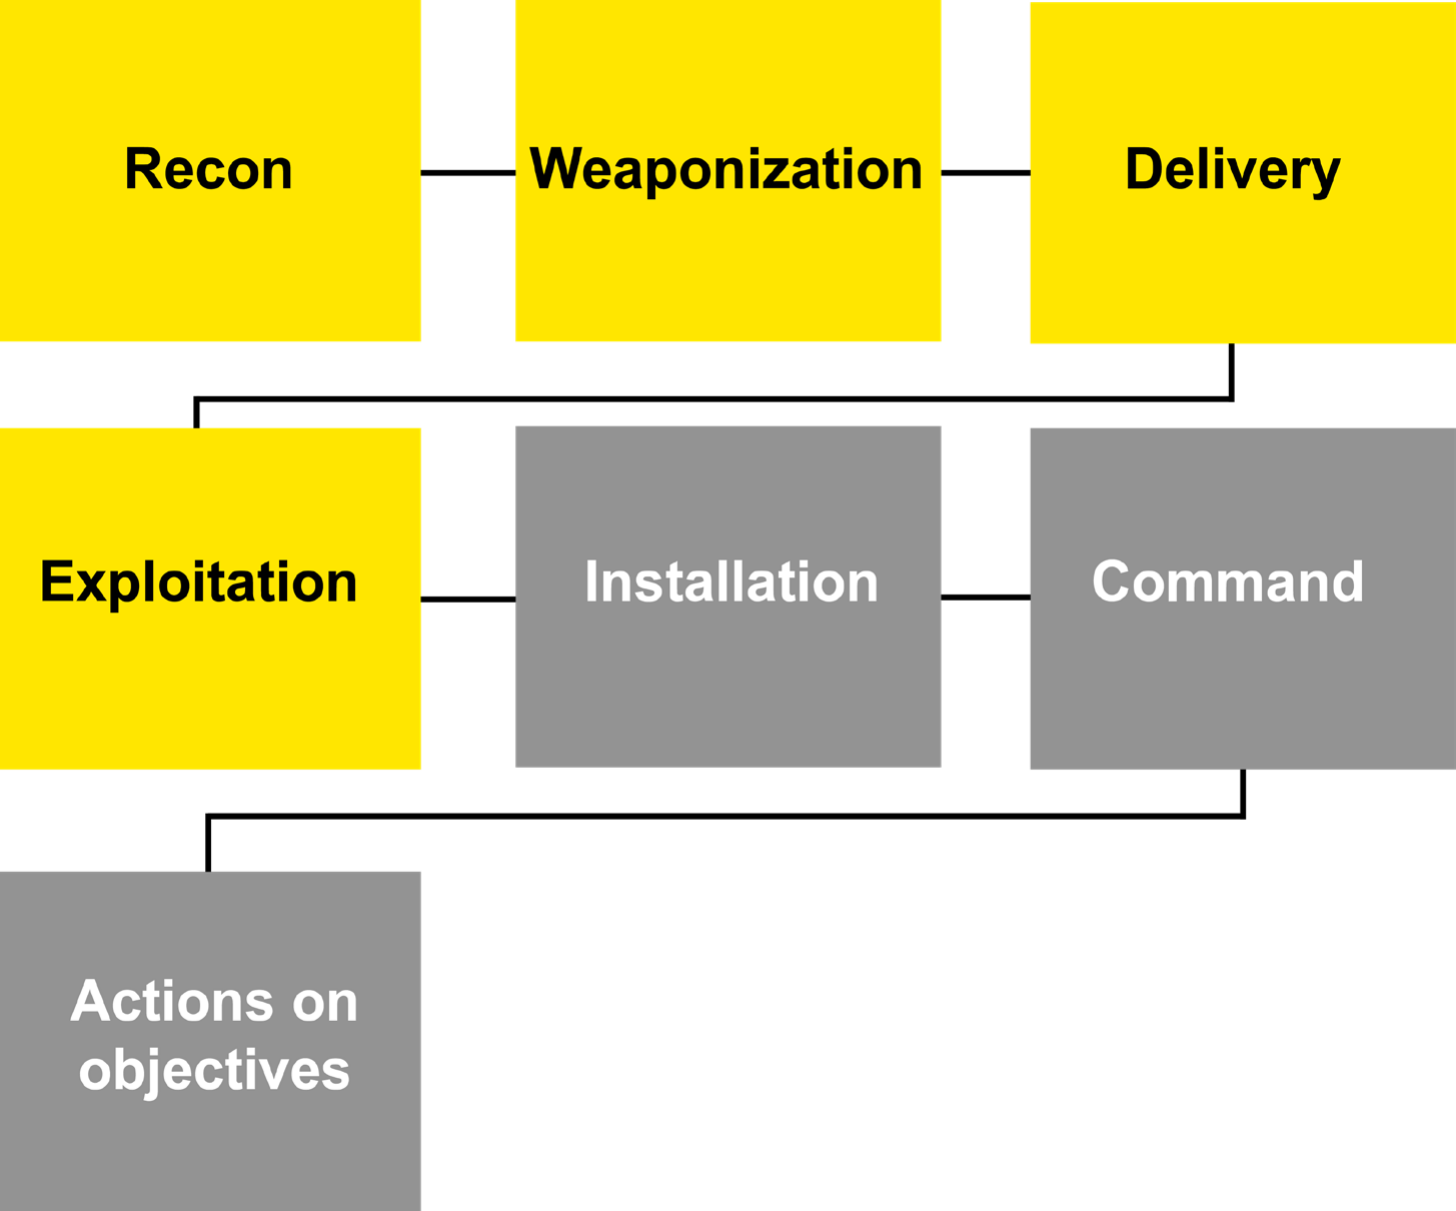 BlackShark operates at the first phases of the Intrusion Kill Chain model: